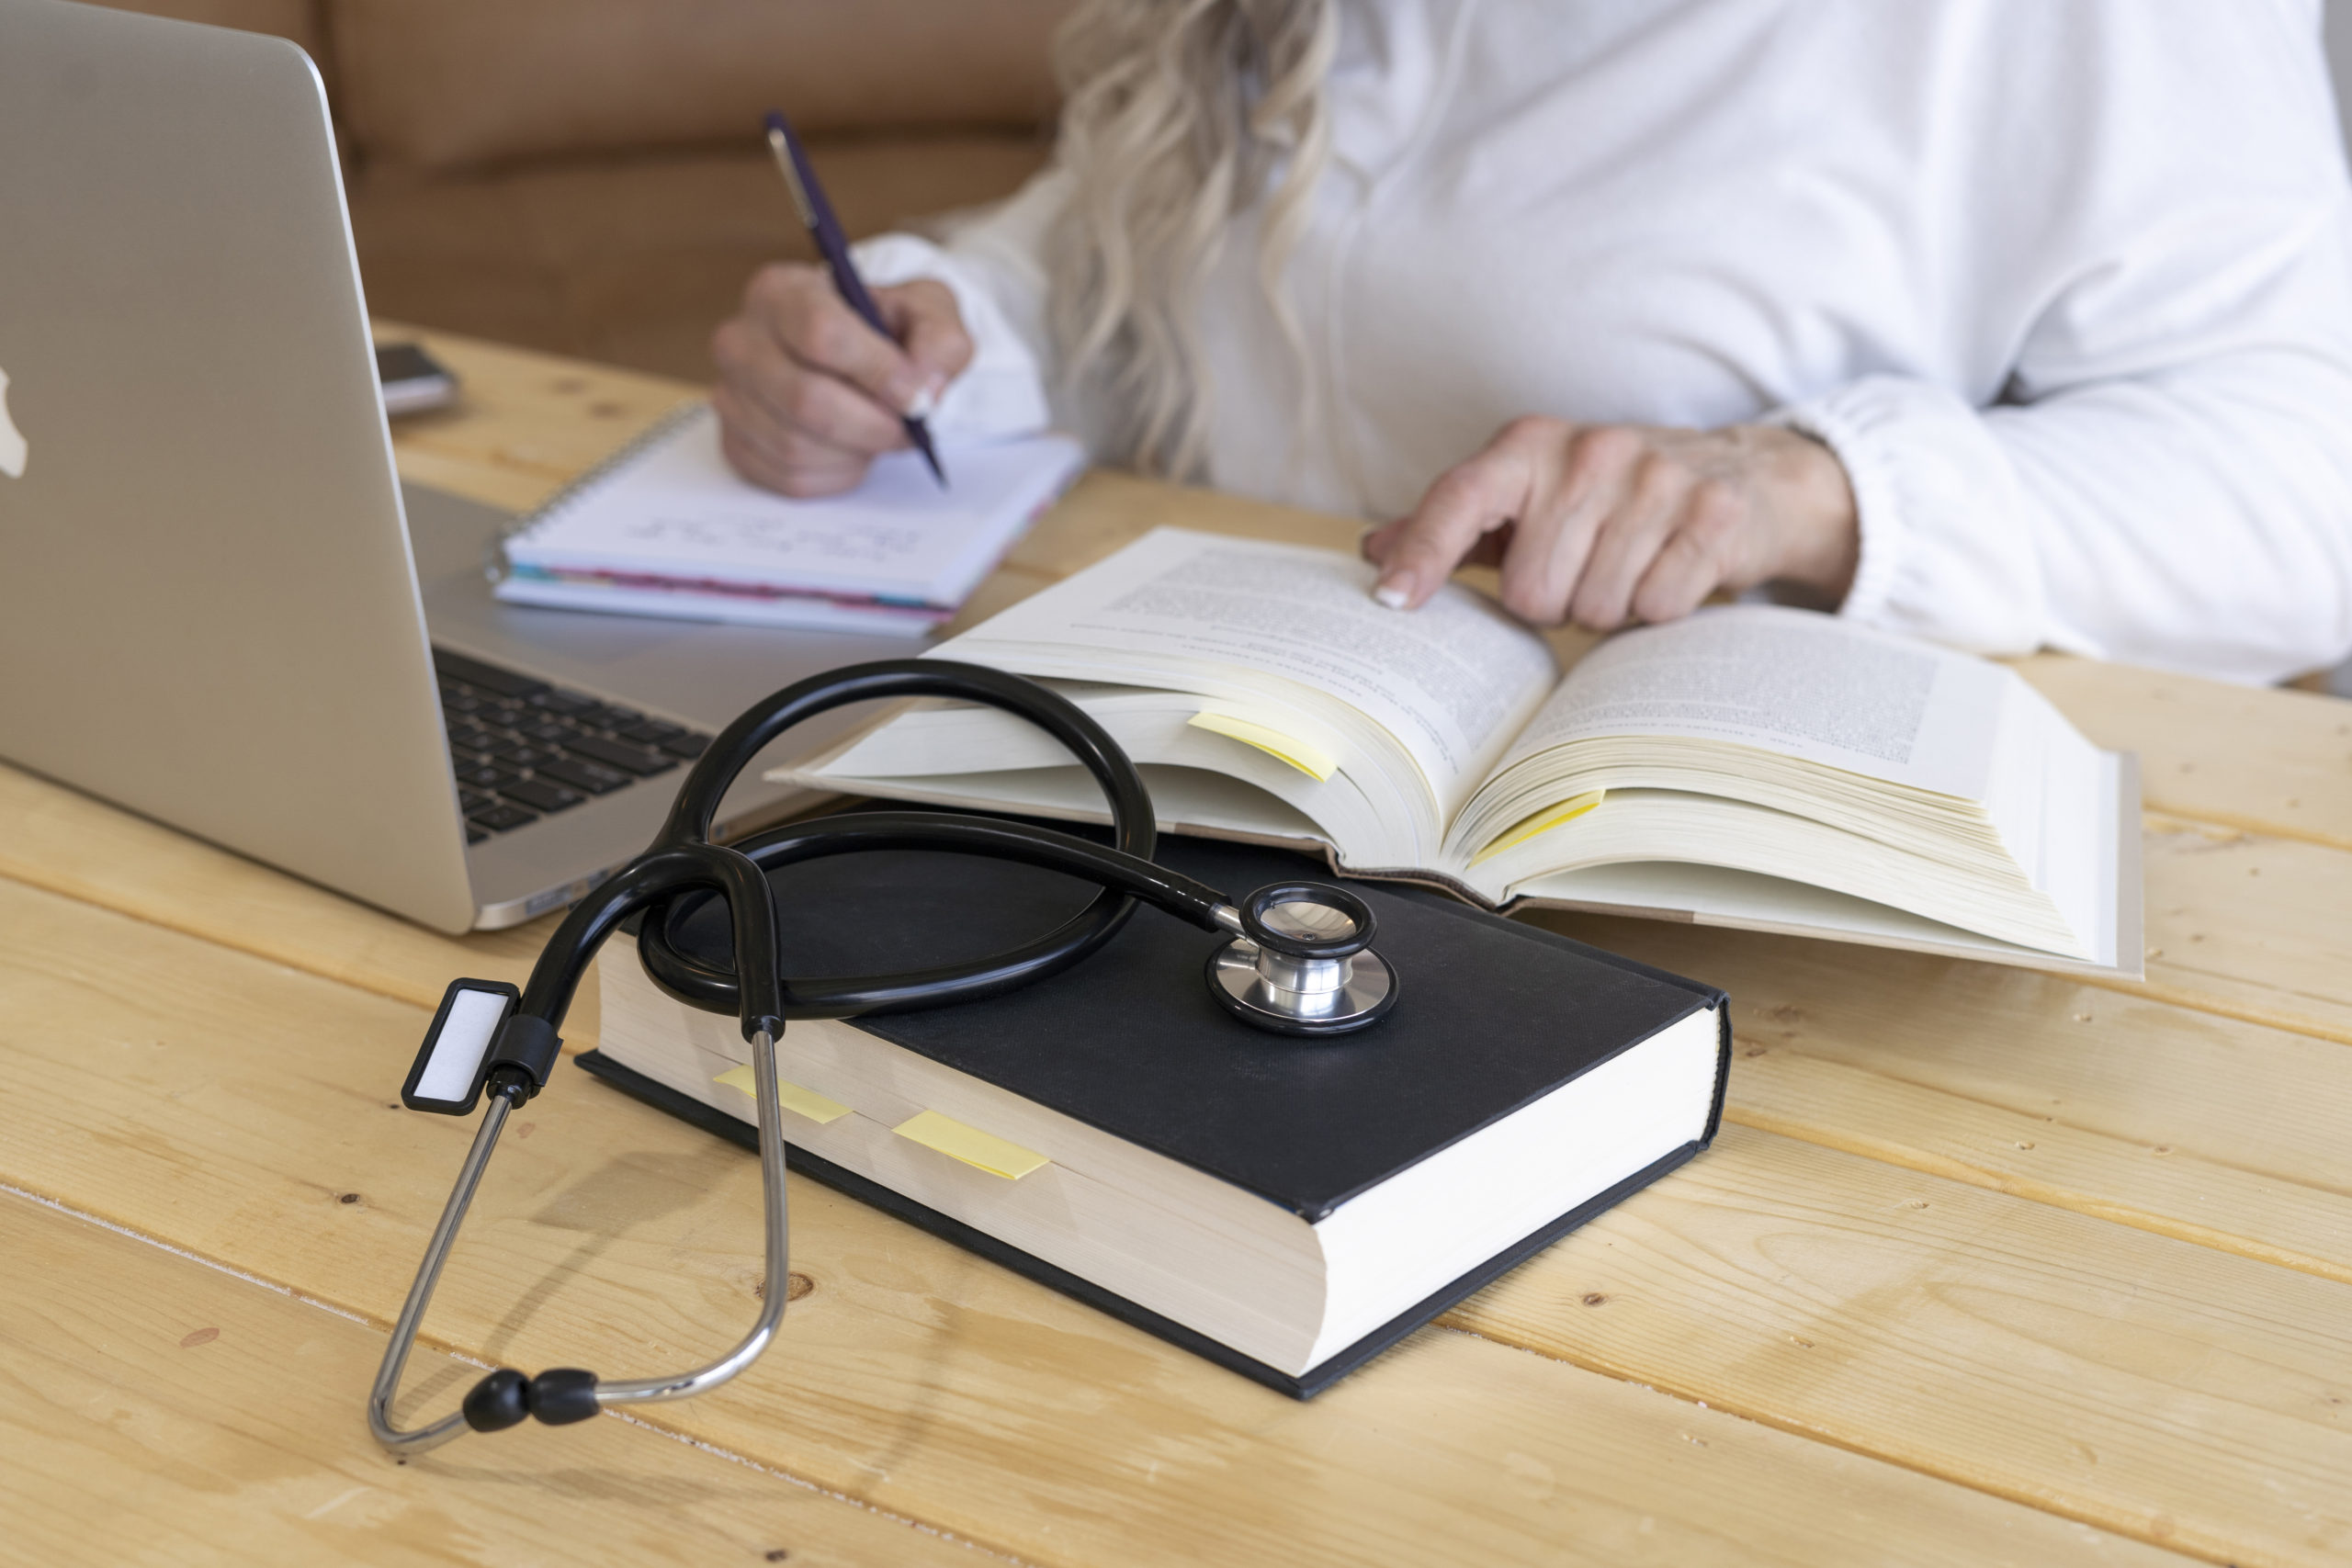 white-lady-reading-a-book-and-writing-on-a-brown-wooden-table-with-a-bible-and-stethoscope-beside